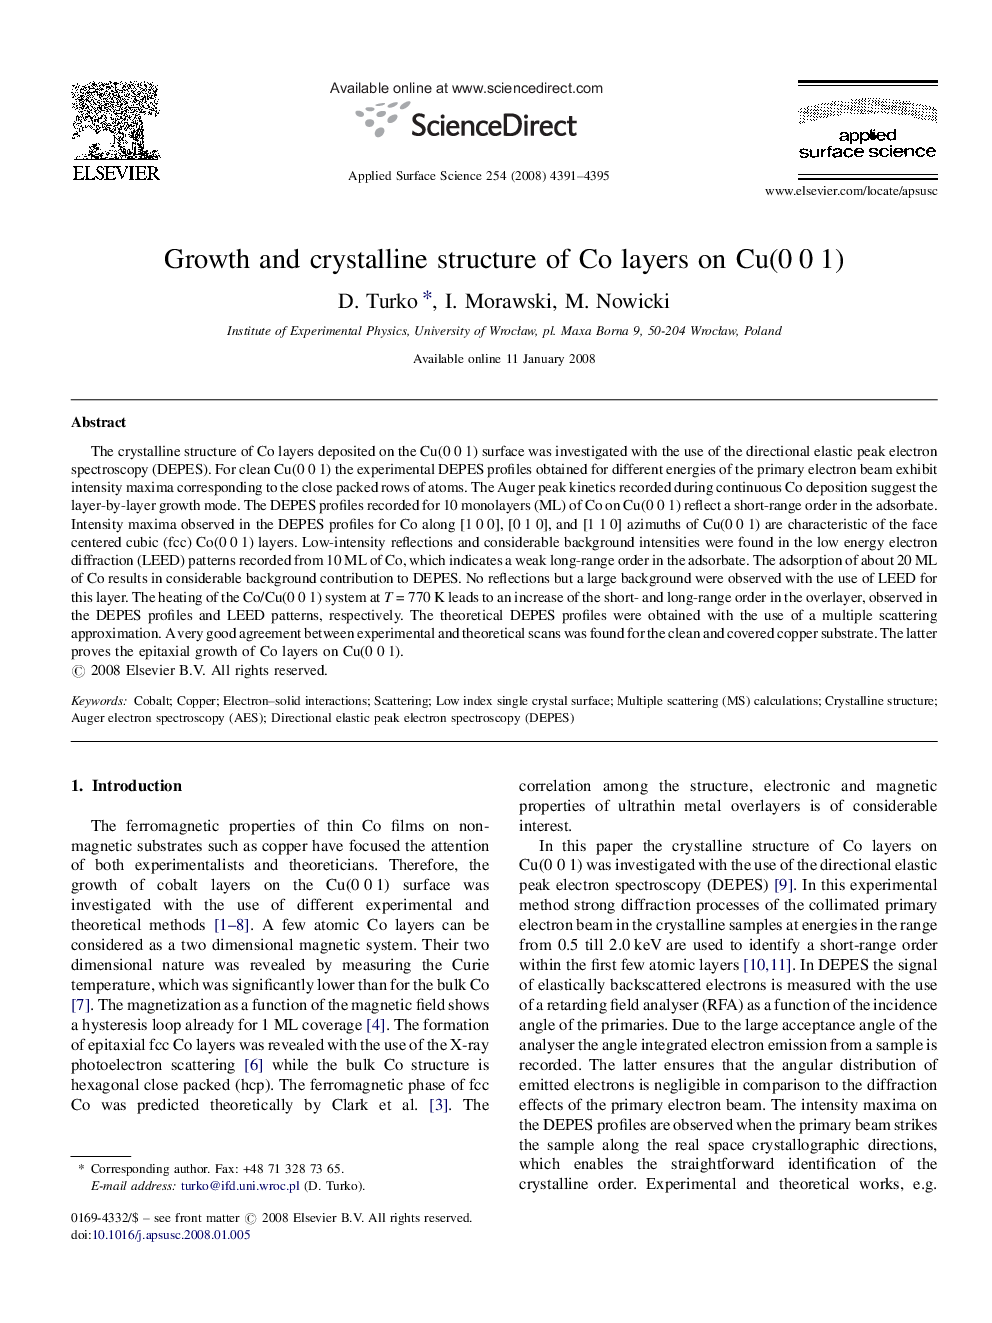 Growth and crystalline structure of Co layers on Cu(0 0 1)